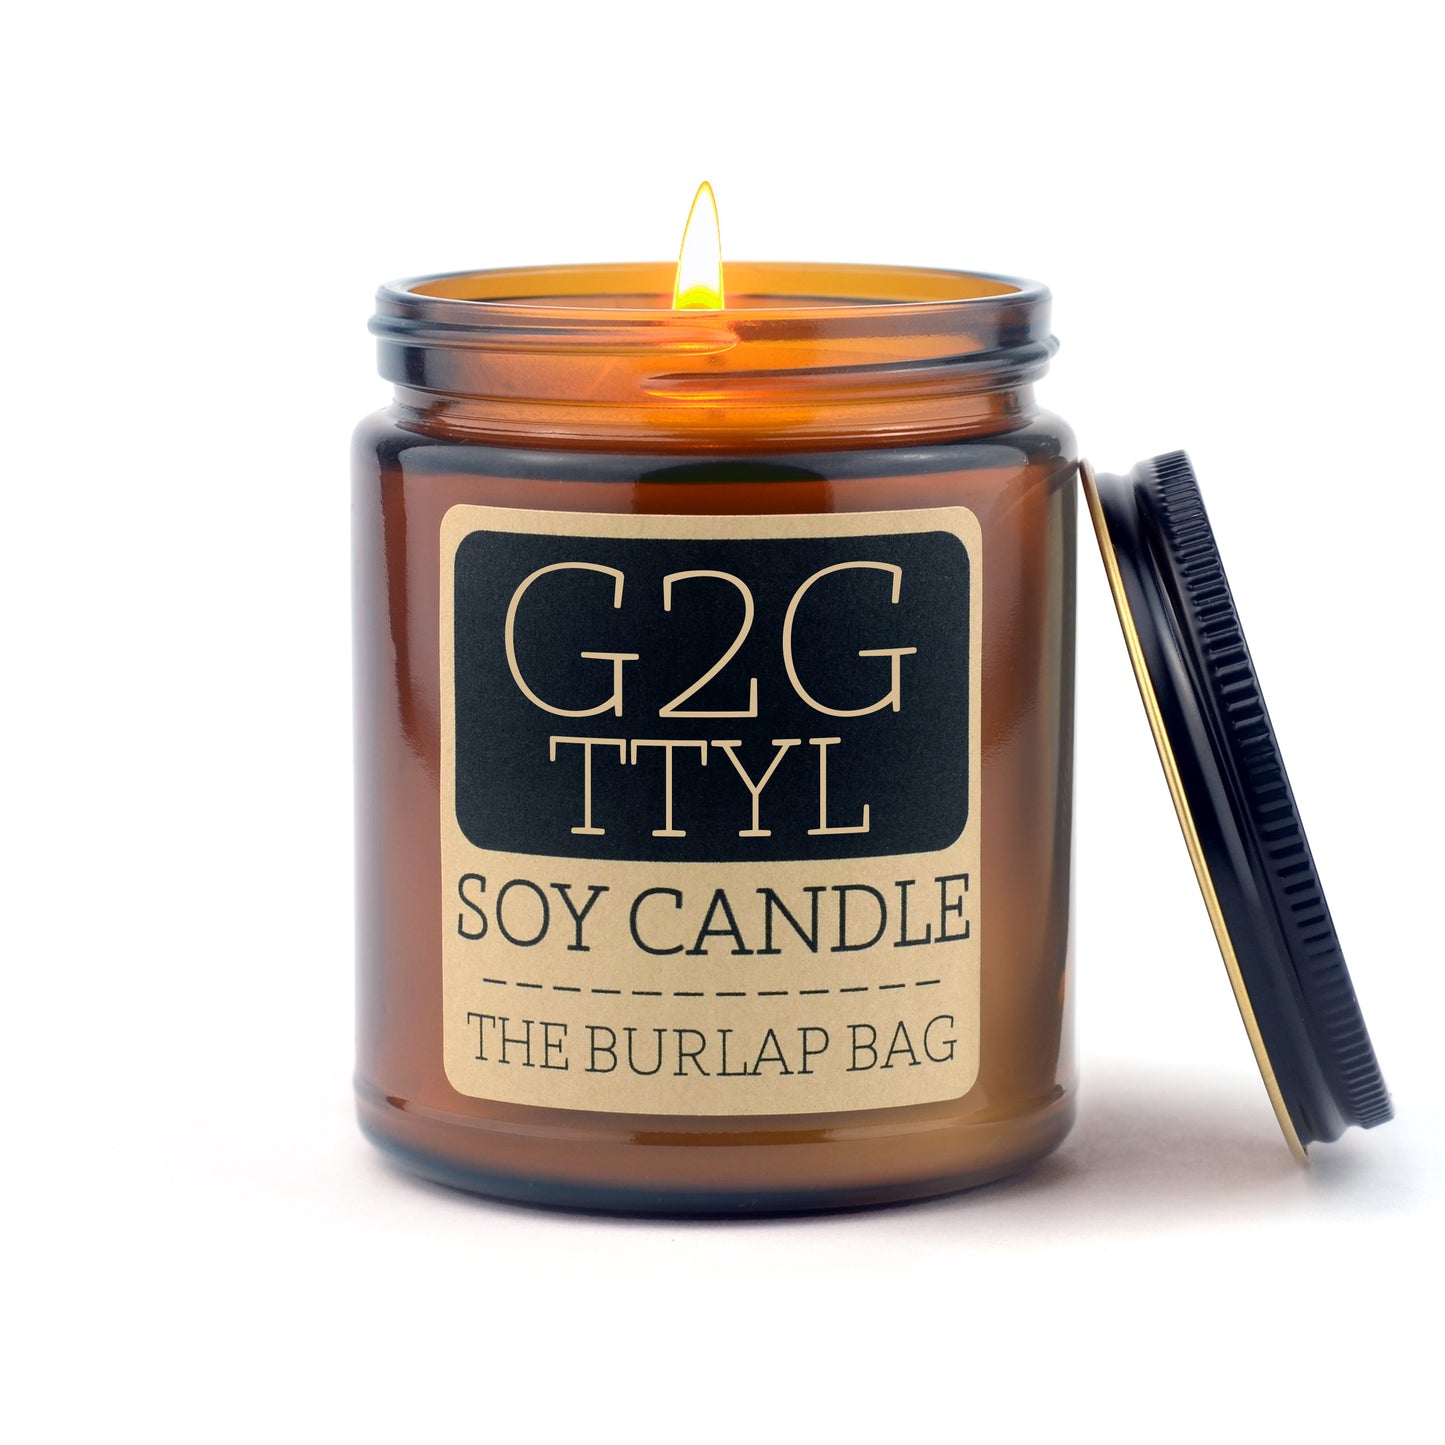 G2G TTYL - Soy Candle 9oz